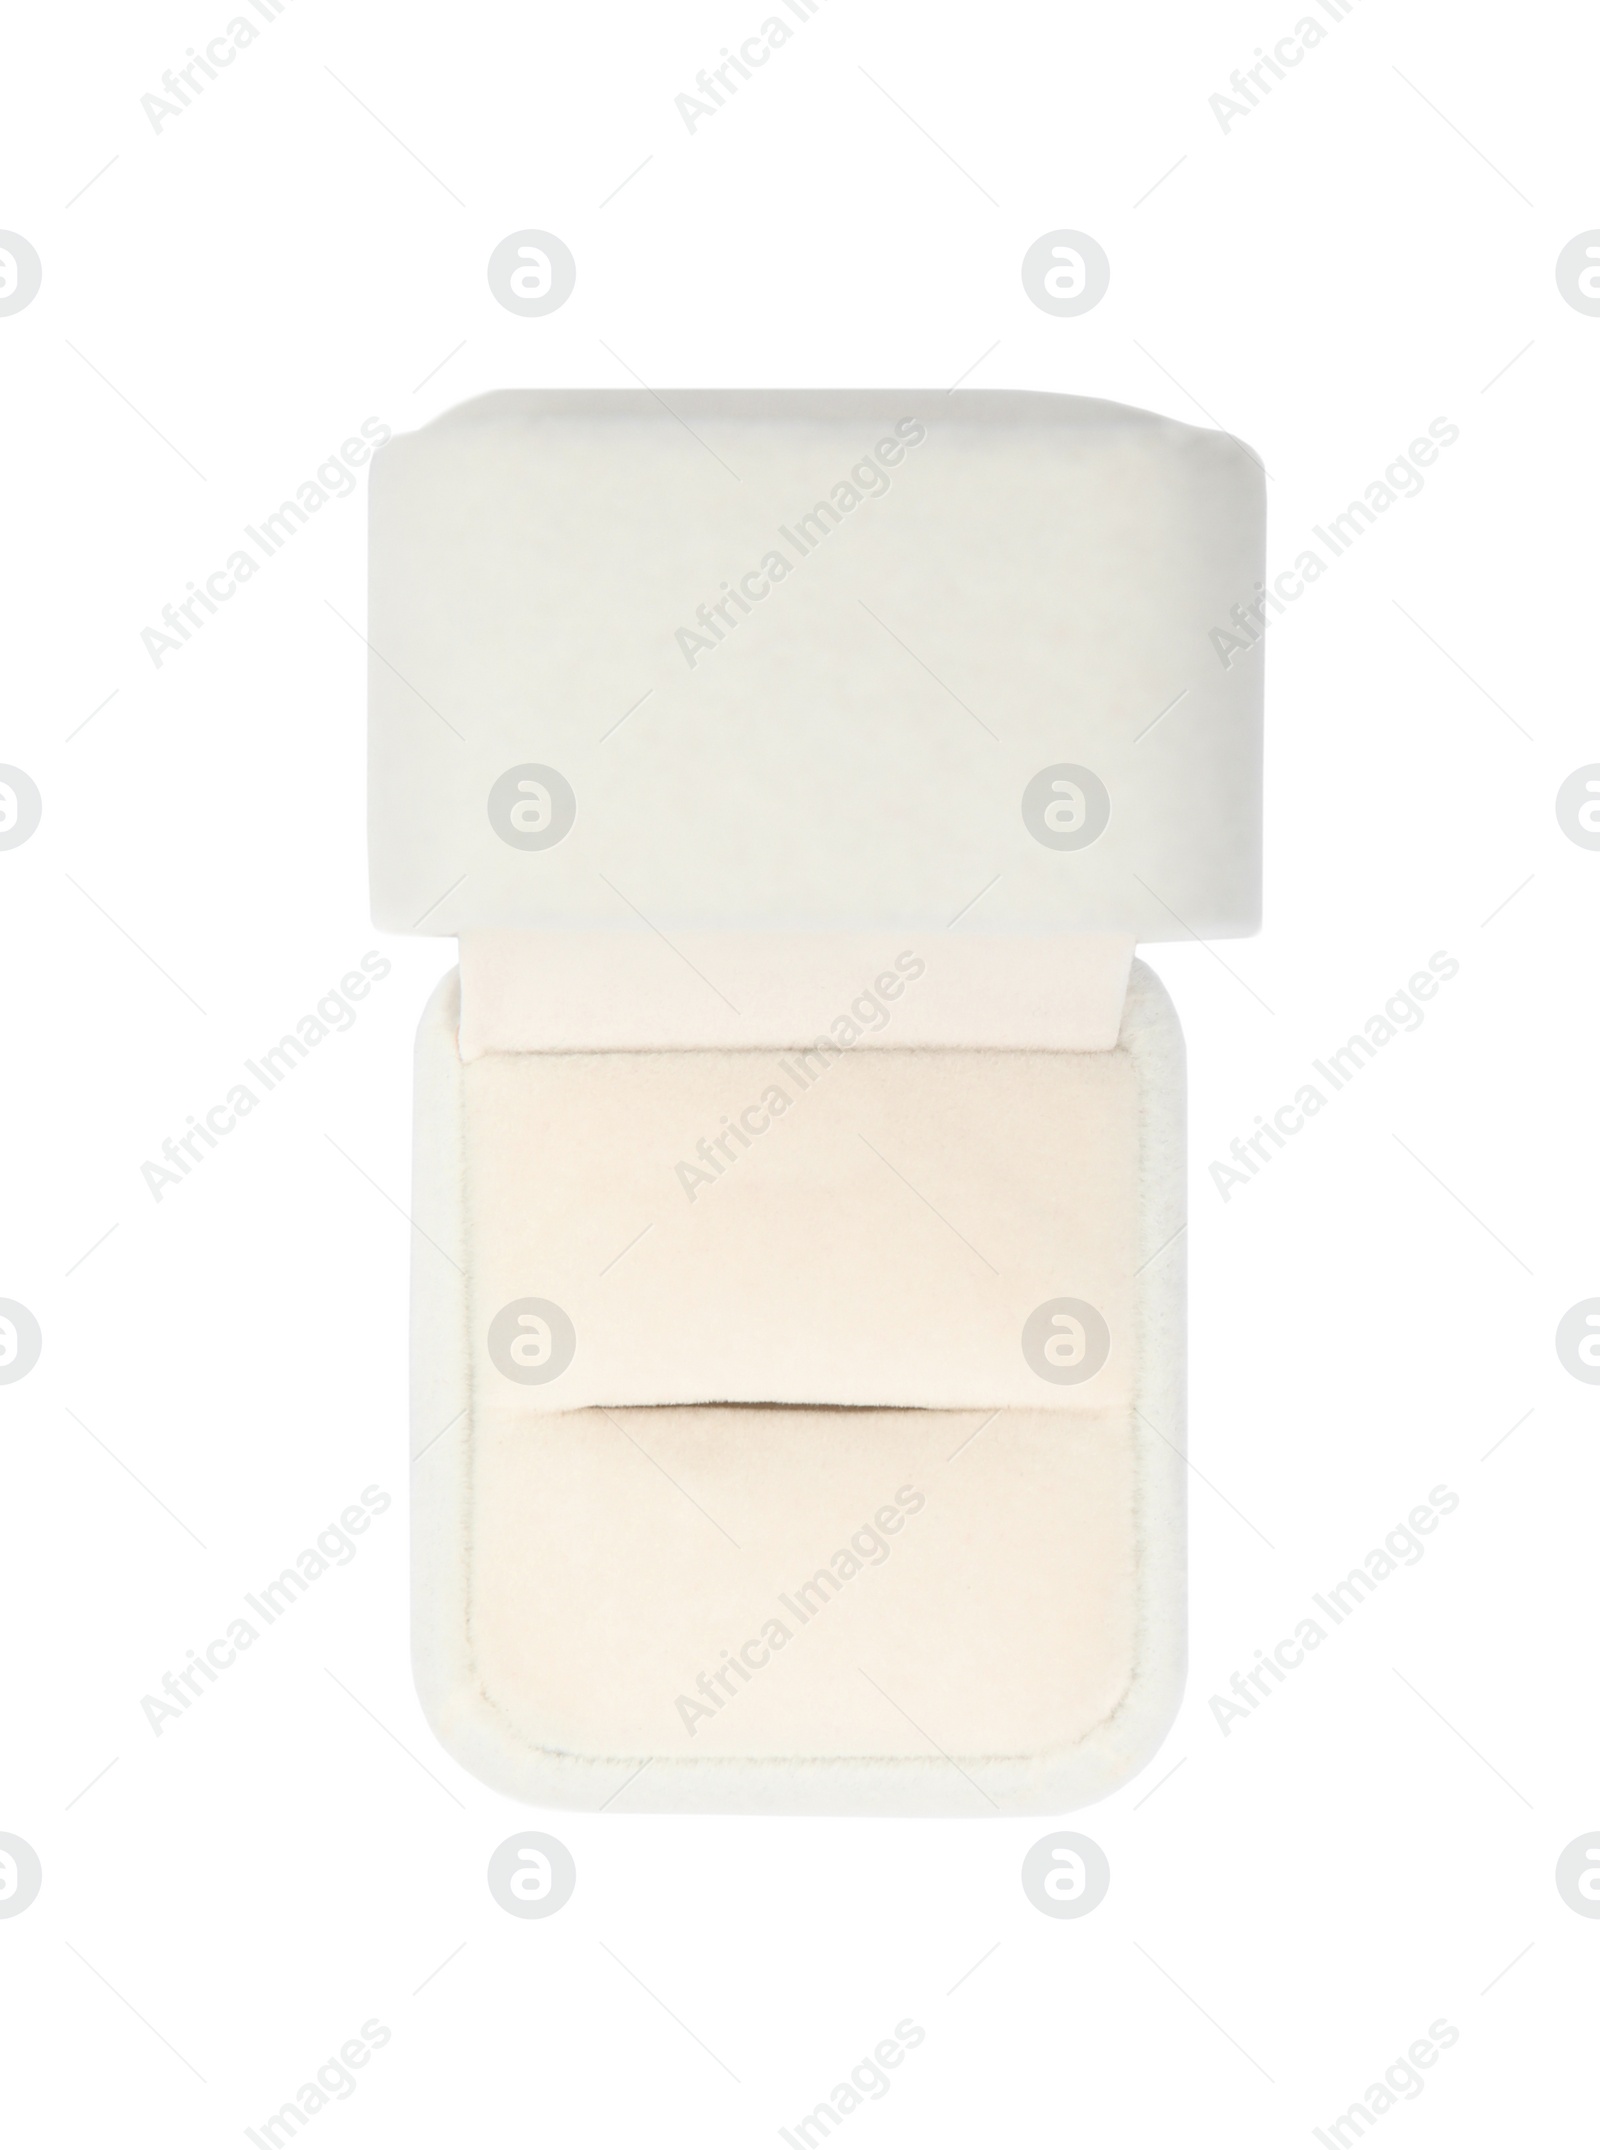 Photo of Empty stylish ring box isolated on white, top view